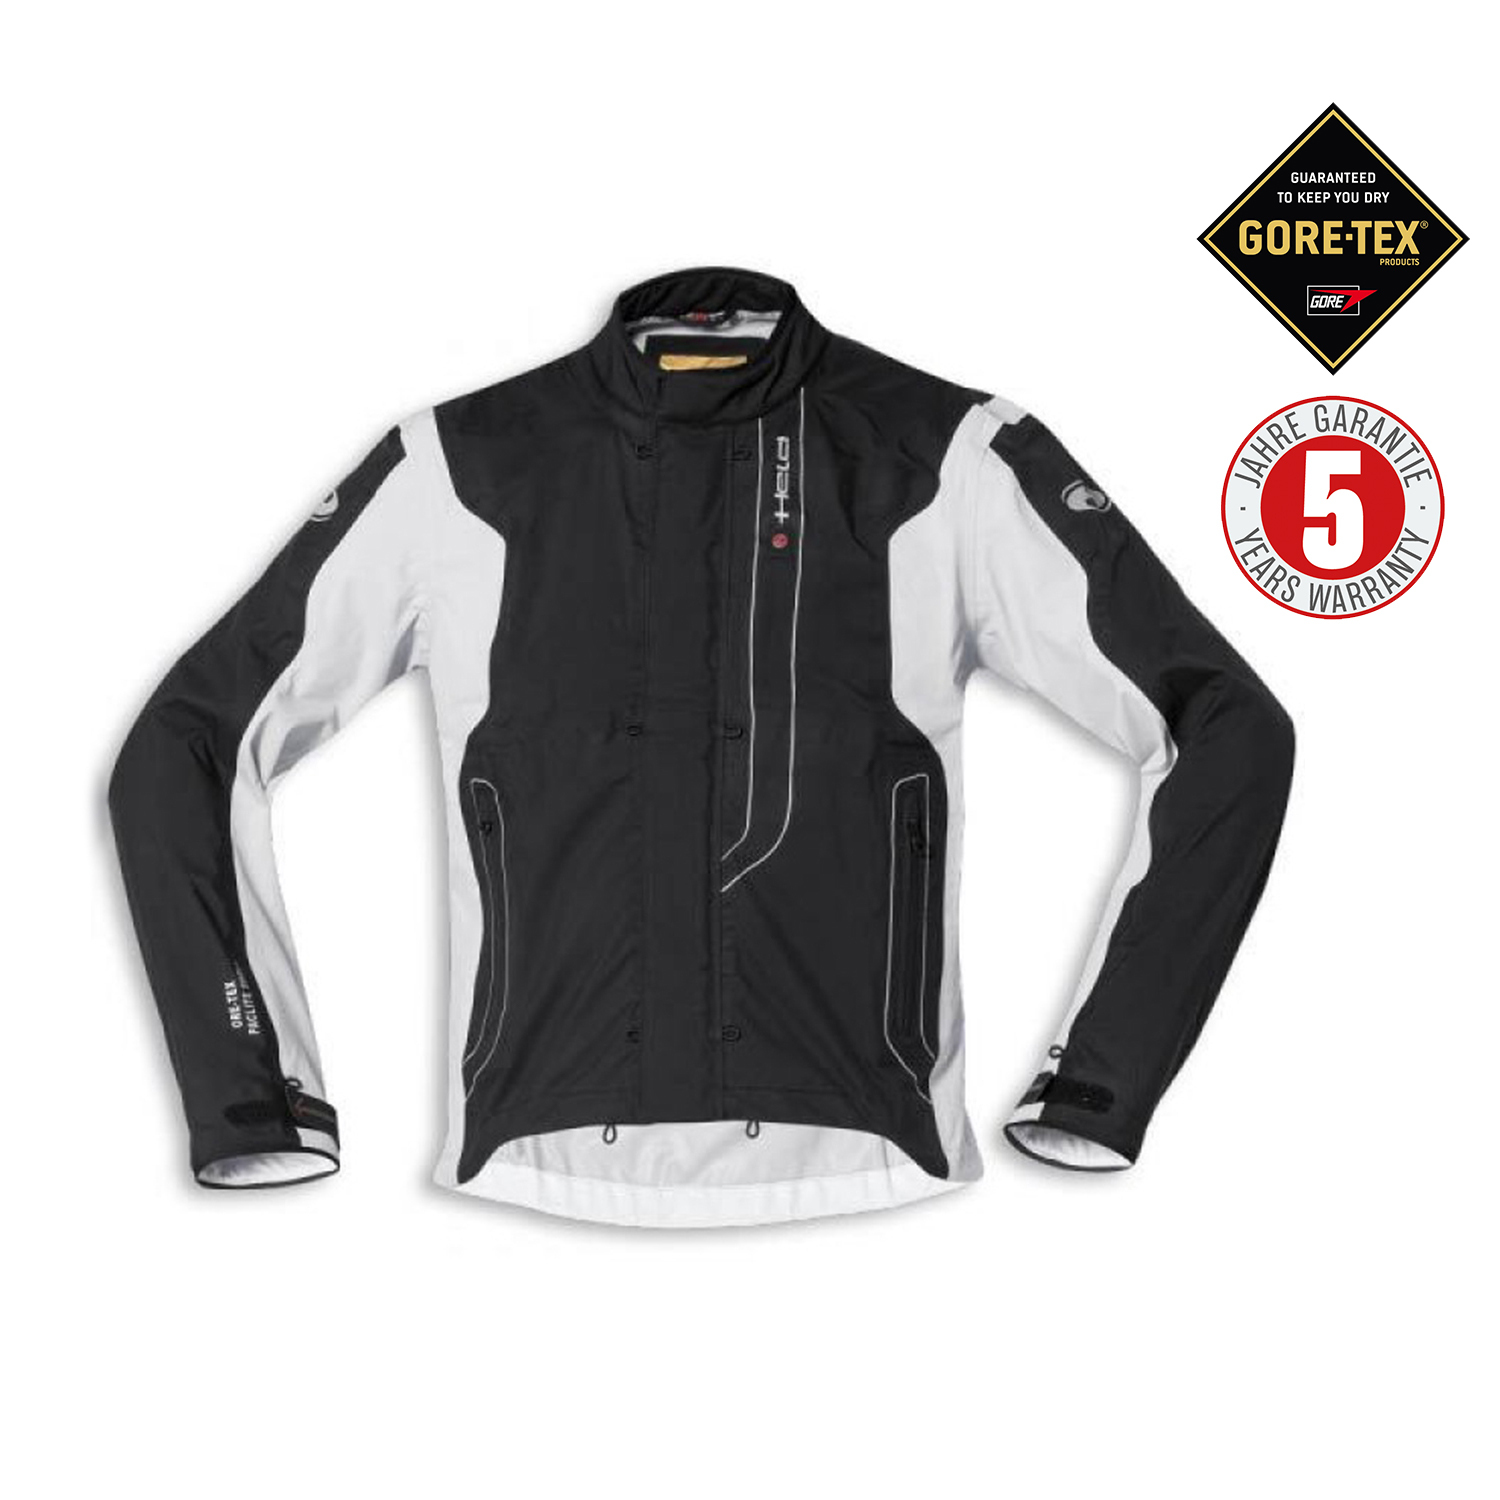 Held Arso Jacket - Available in Various Sizes